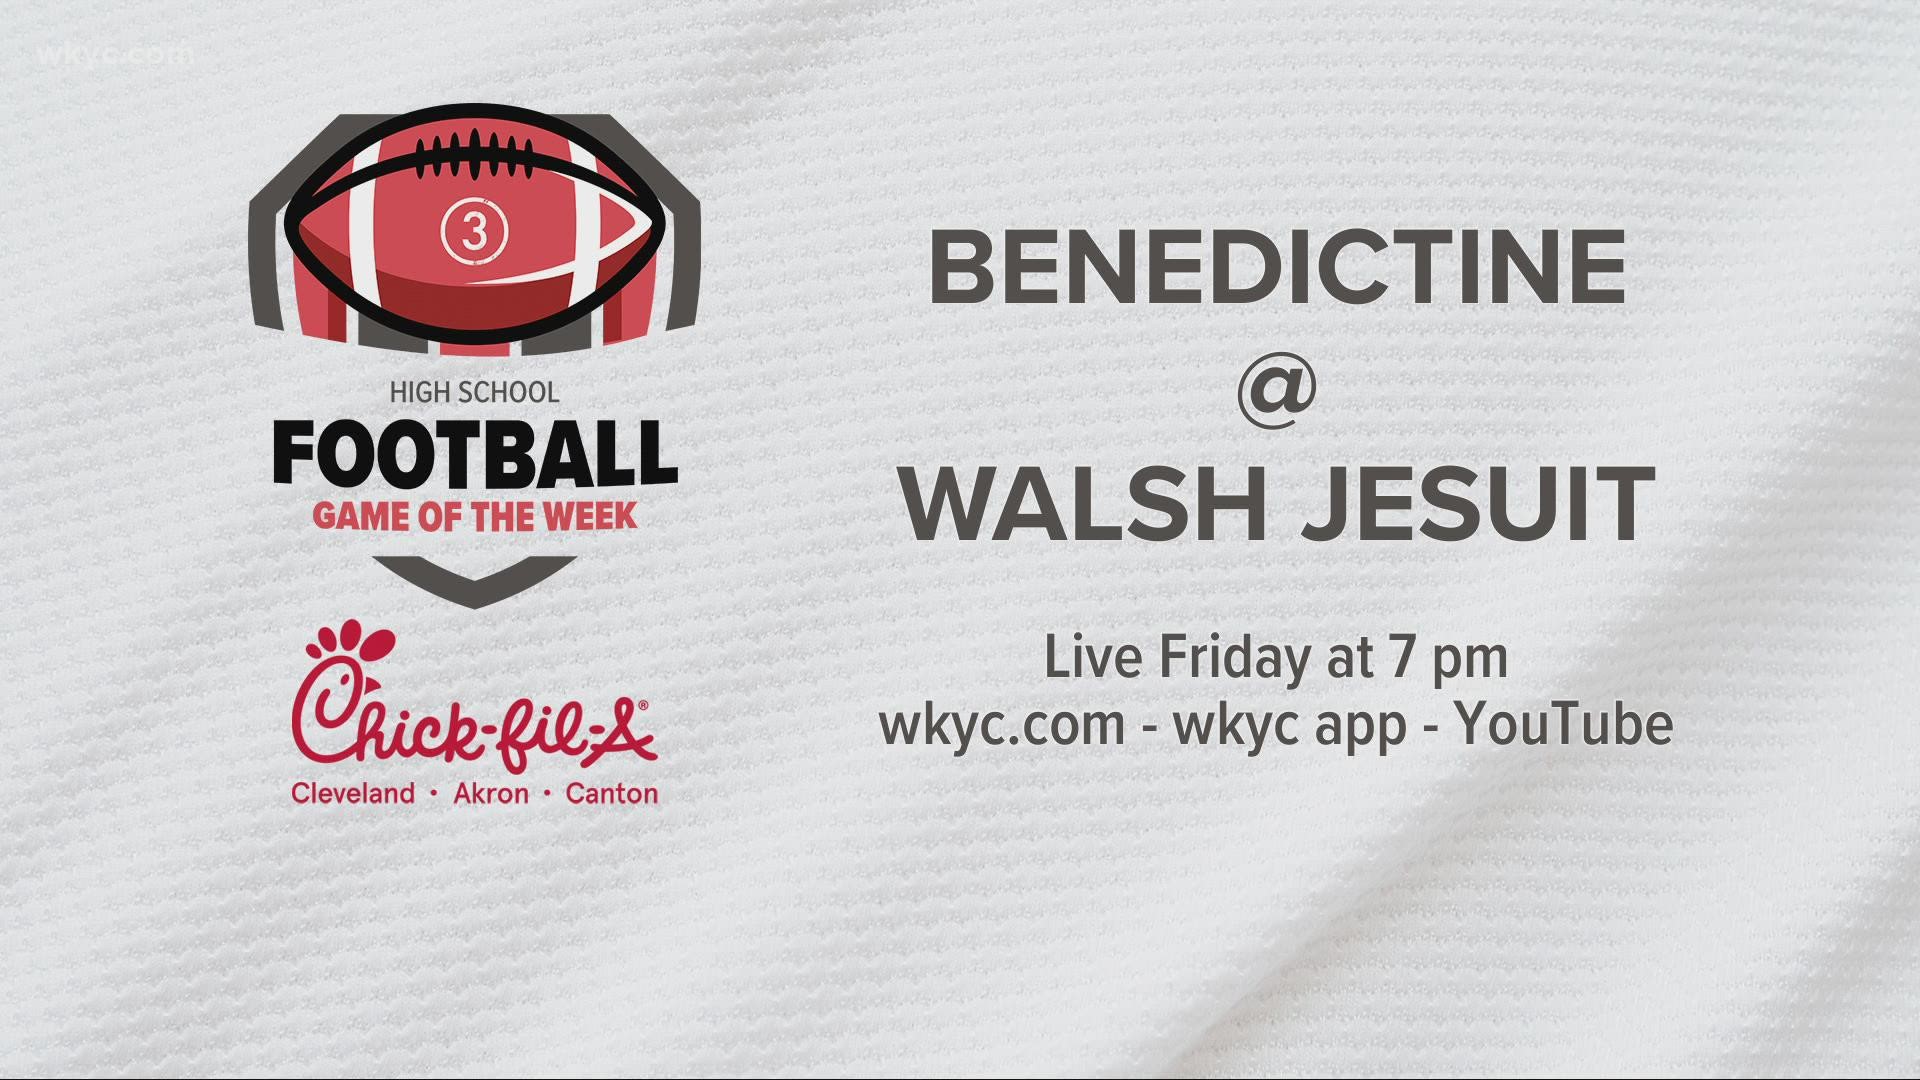 This will be the fourth season of the WKYC.com High School Football Game of the Week. Dave "Dino" DeNatale will have all the action this Friday night.